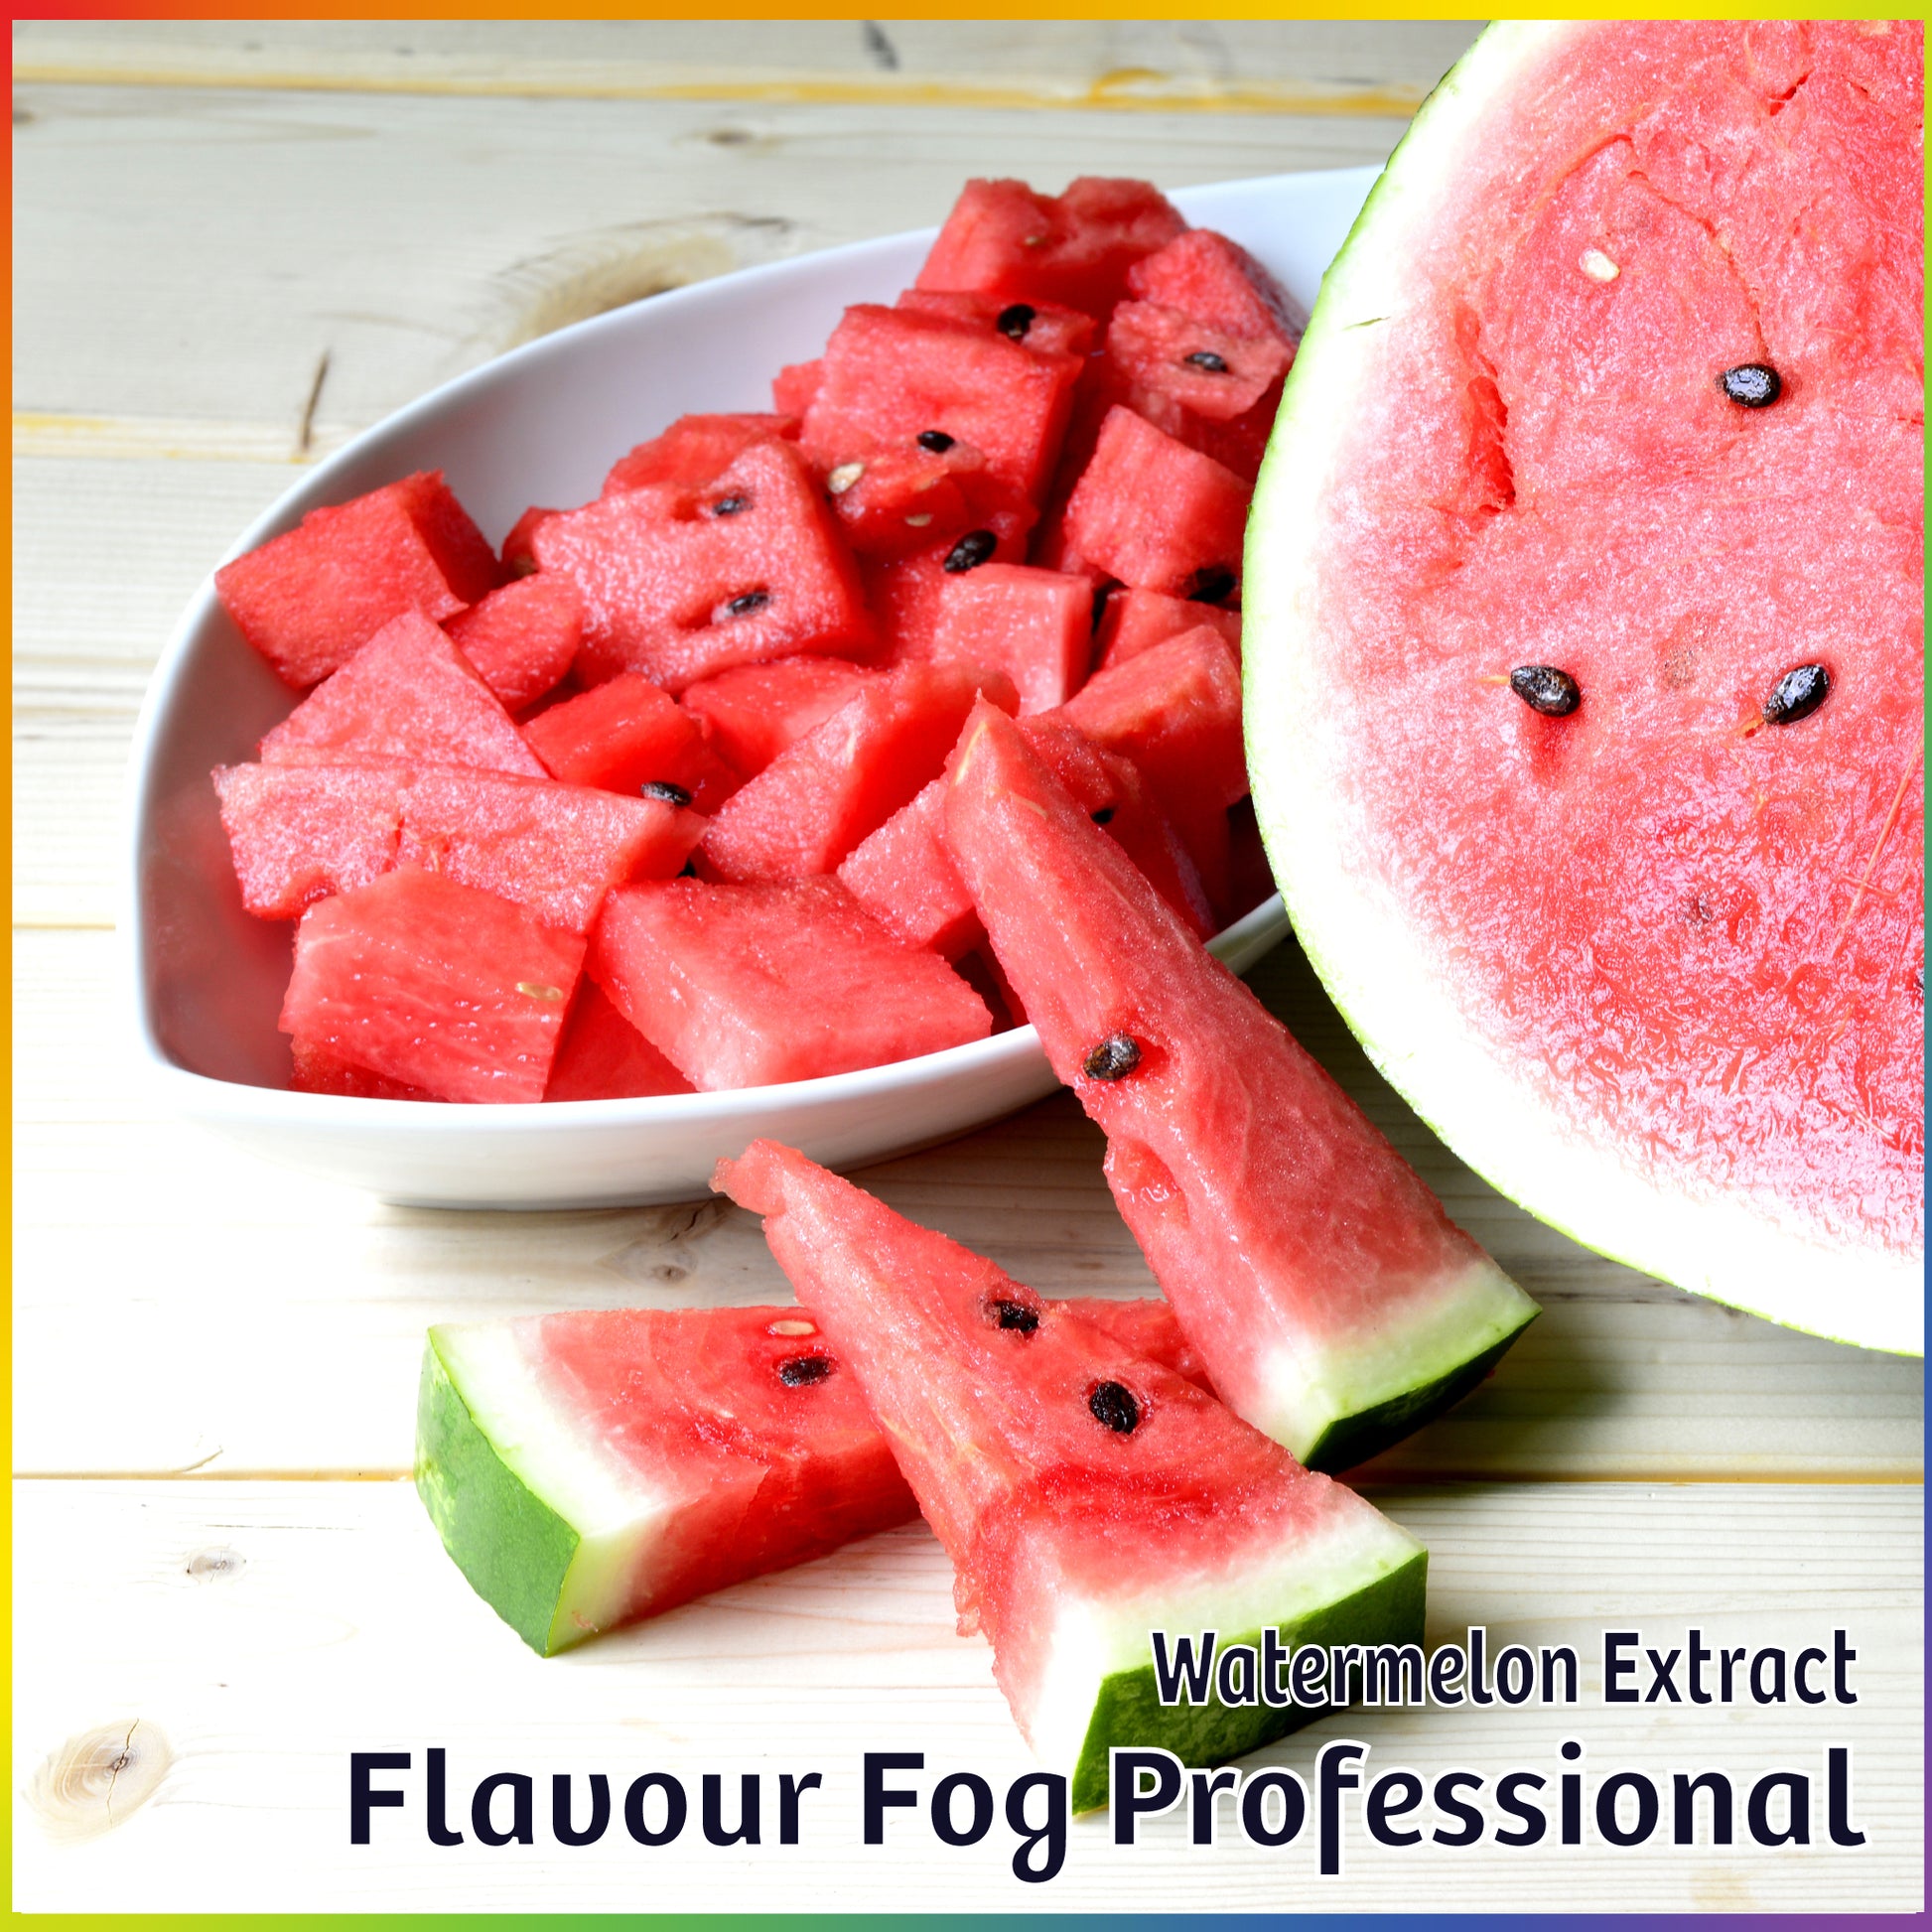 Watermelon Extract - FF Pro - Flavour Fog - Canada's flavour depot.